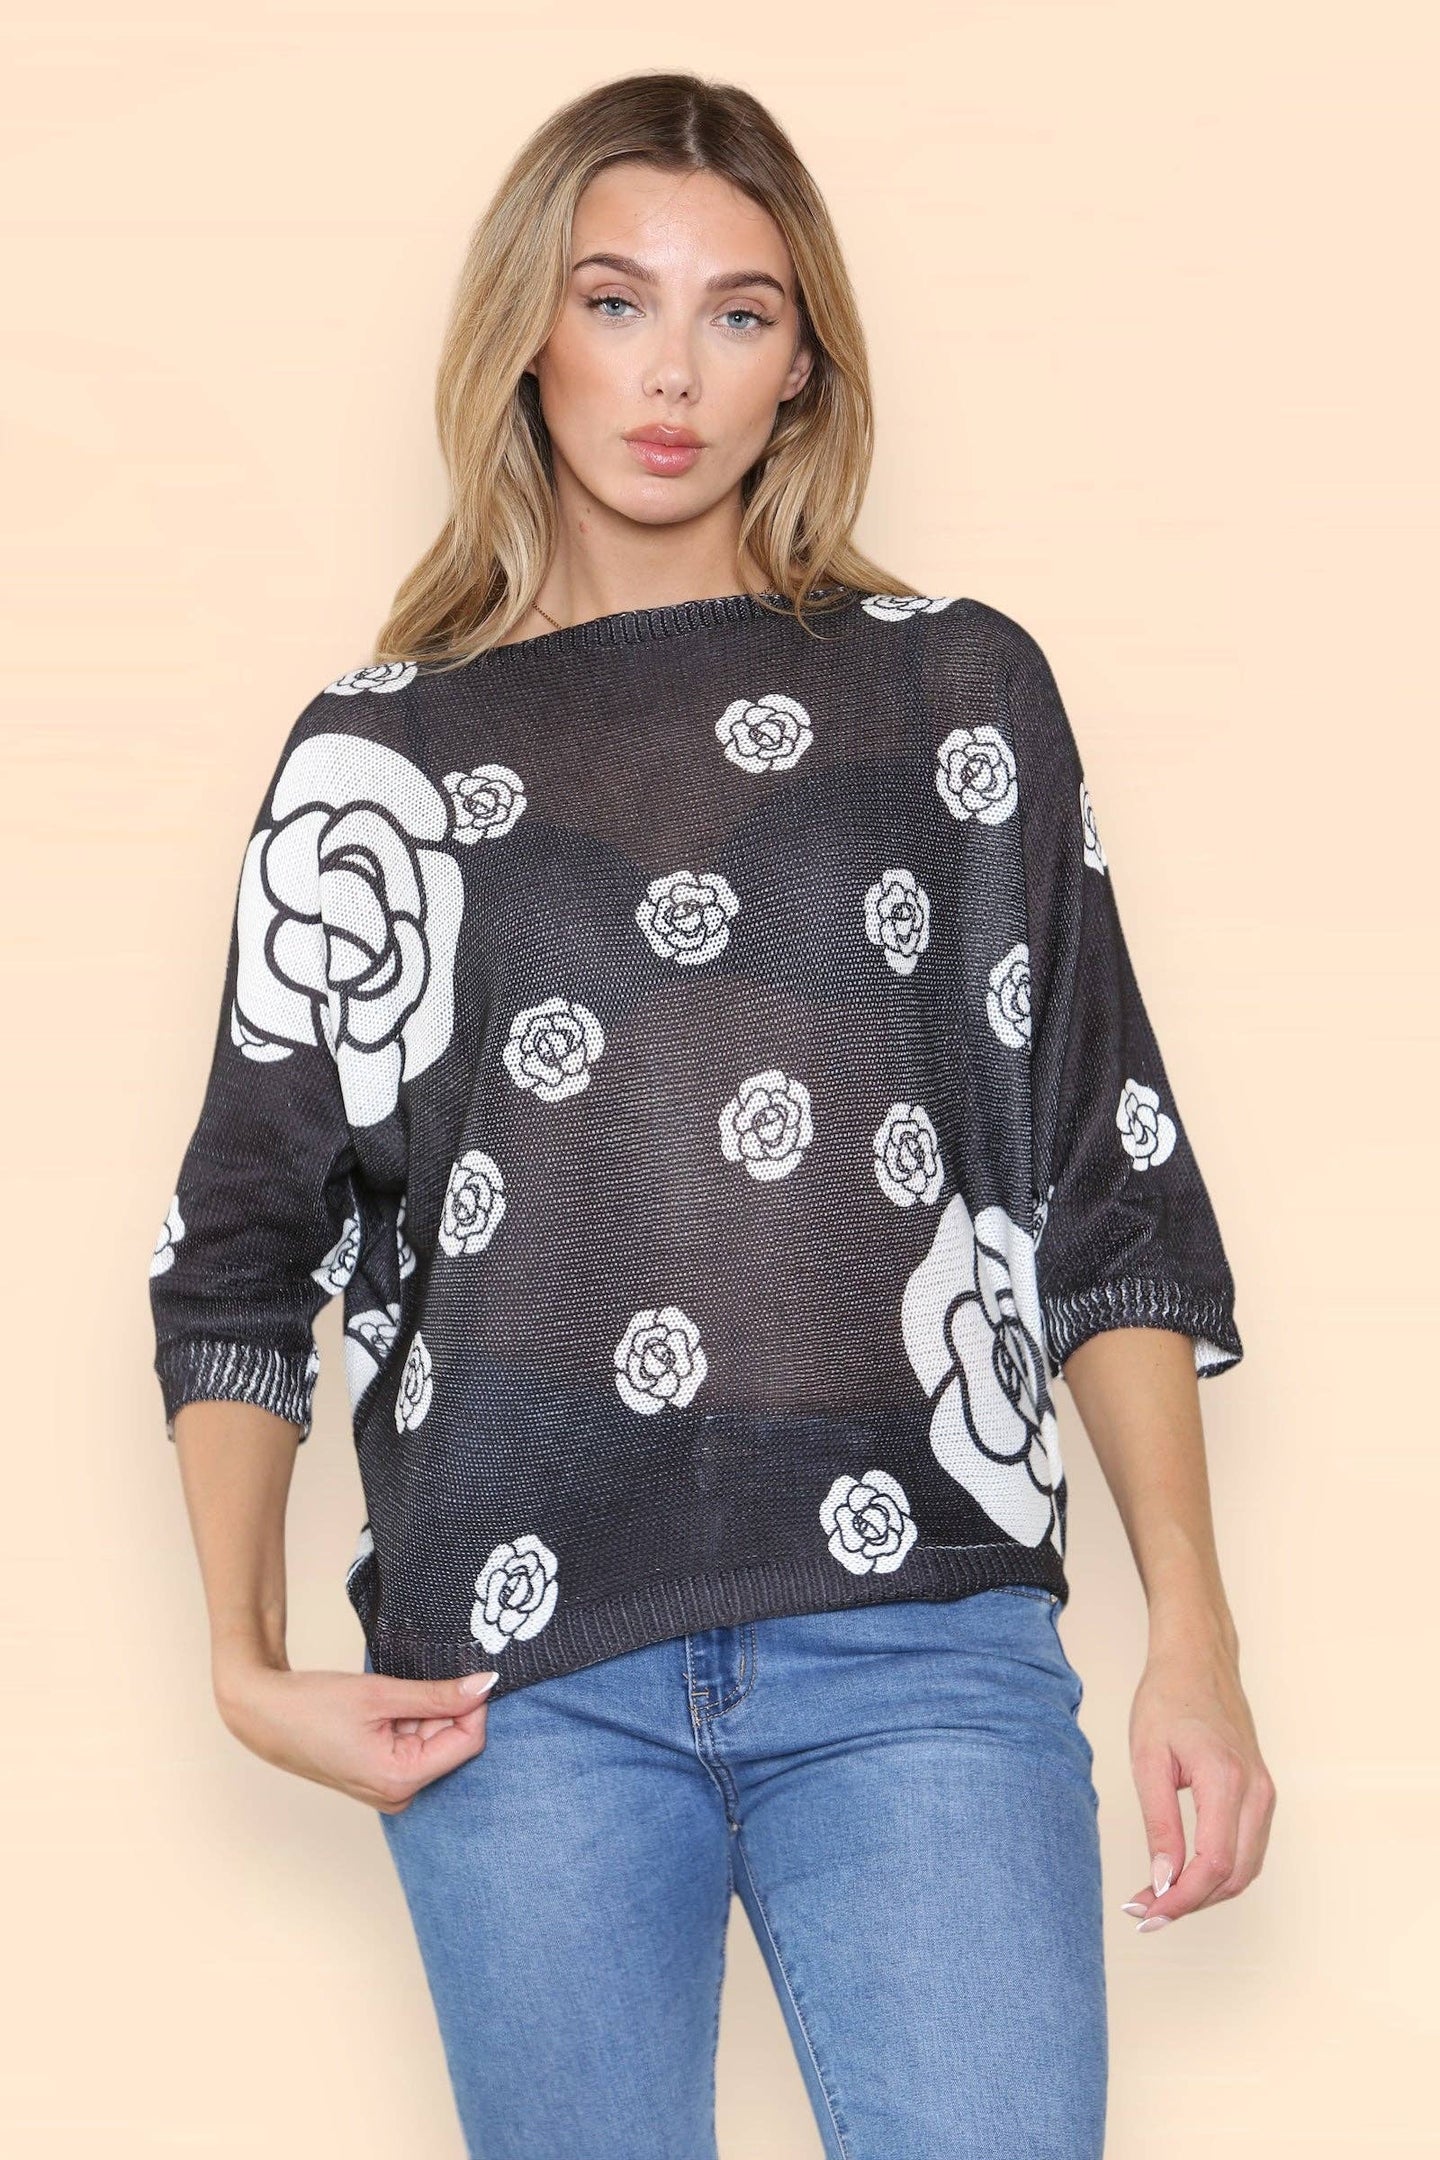 Daisy Print Print Fine Knit Top - Above The Crowd Boutique